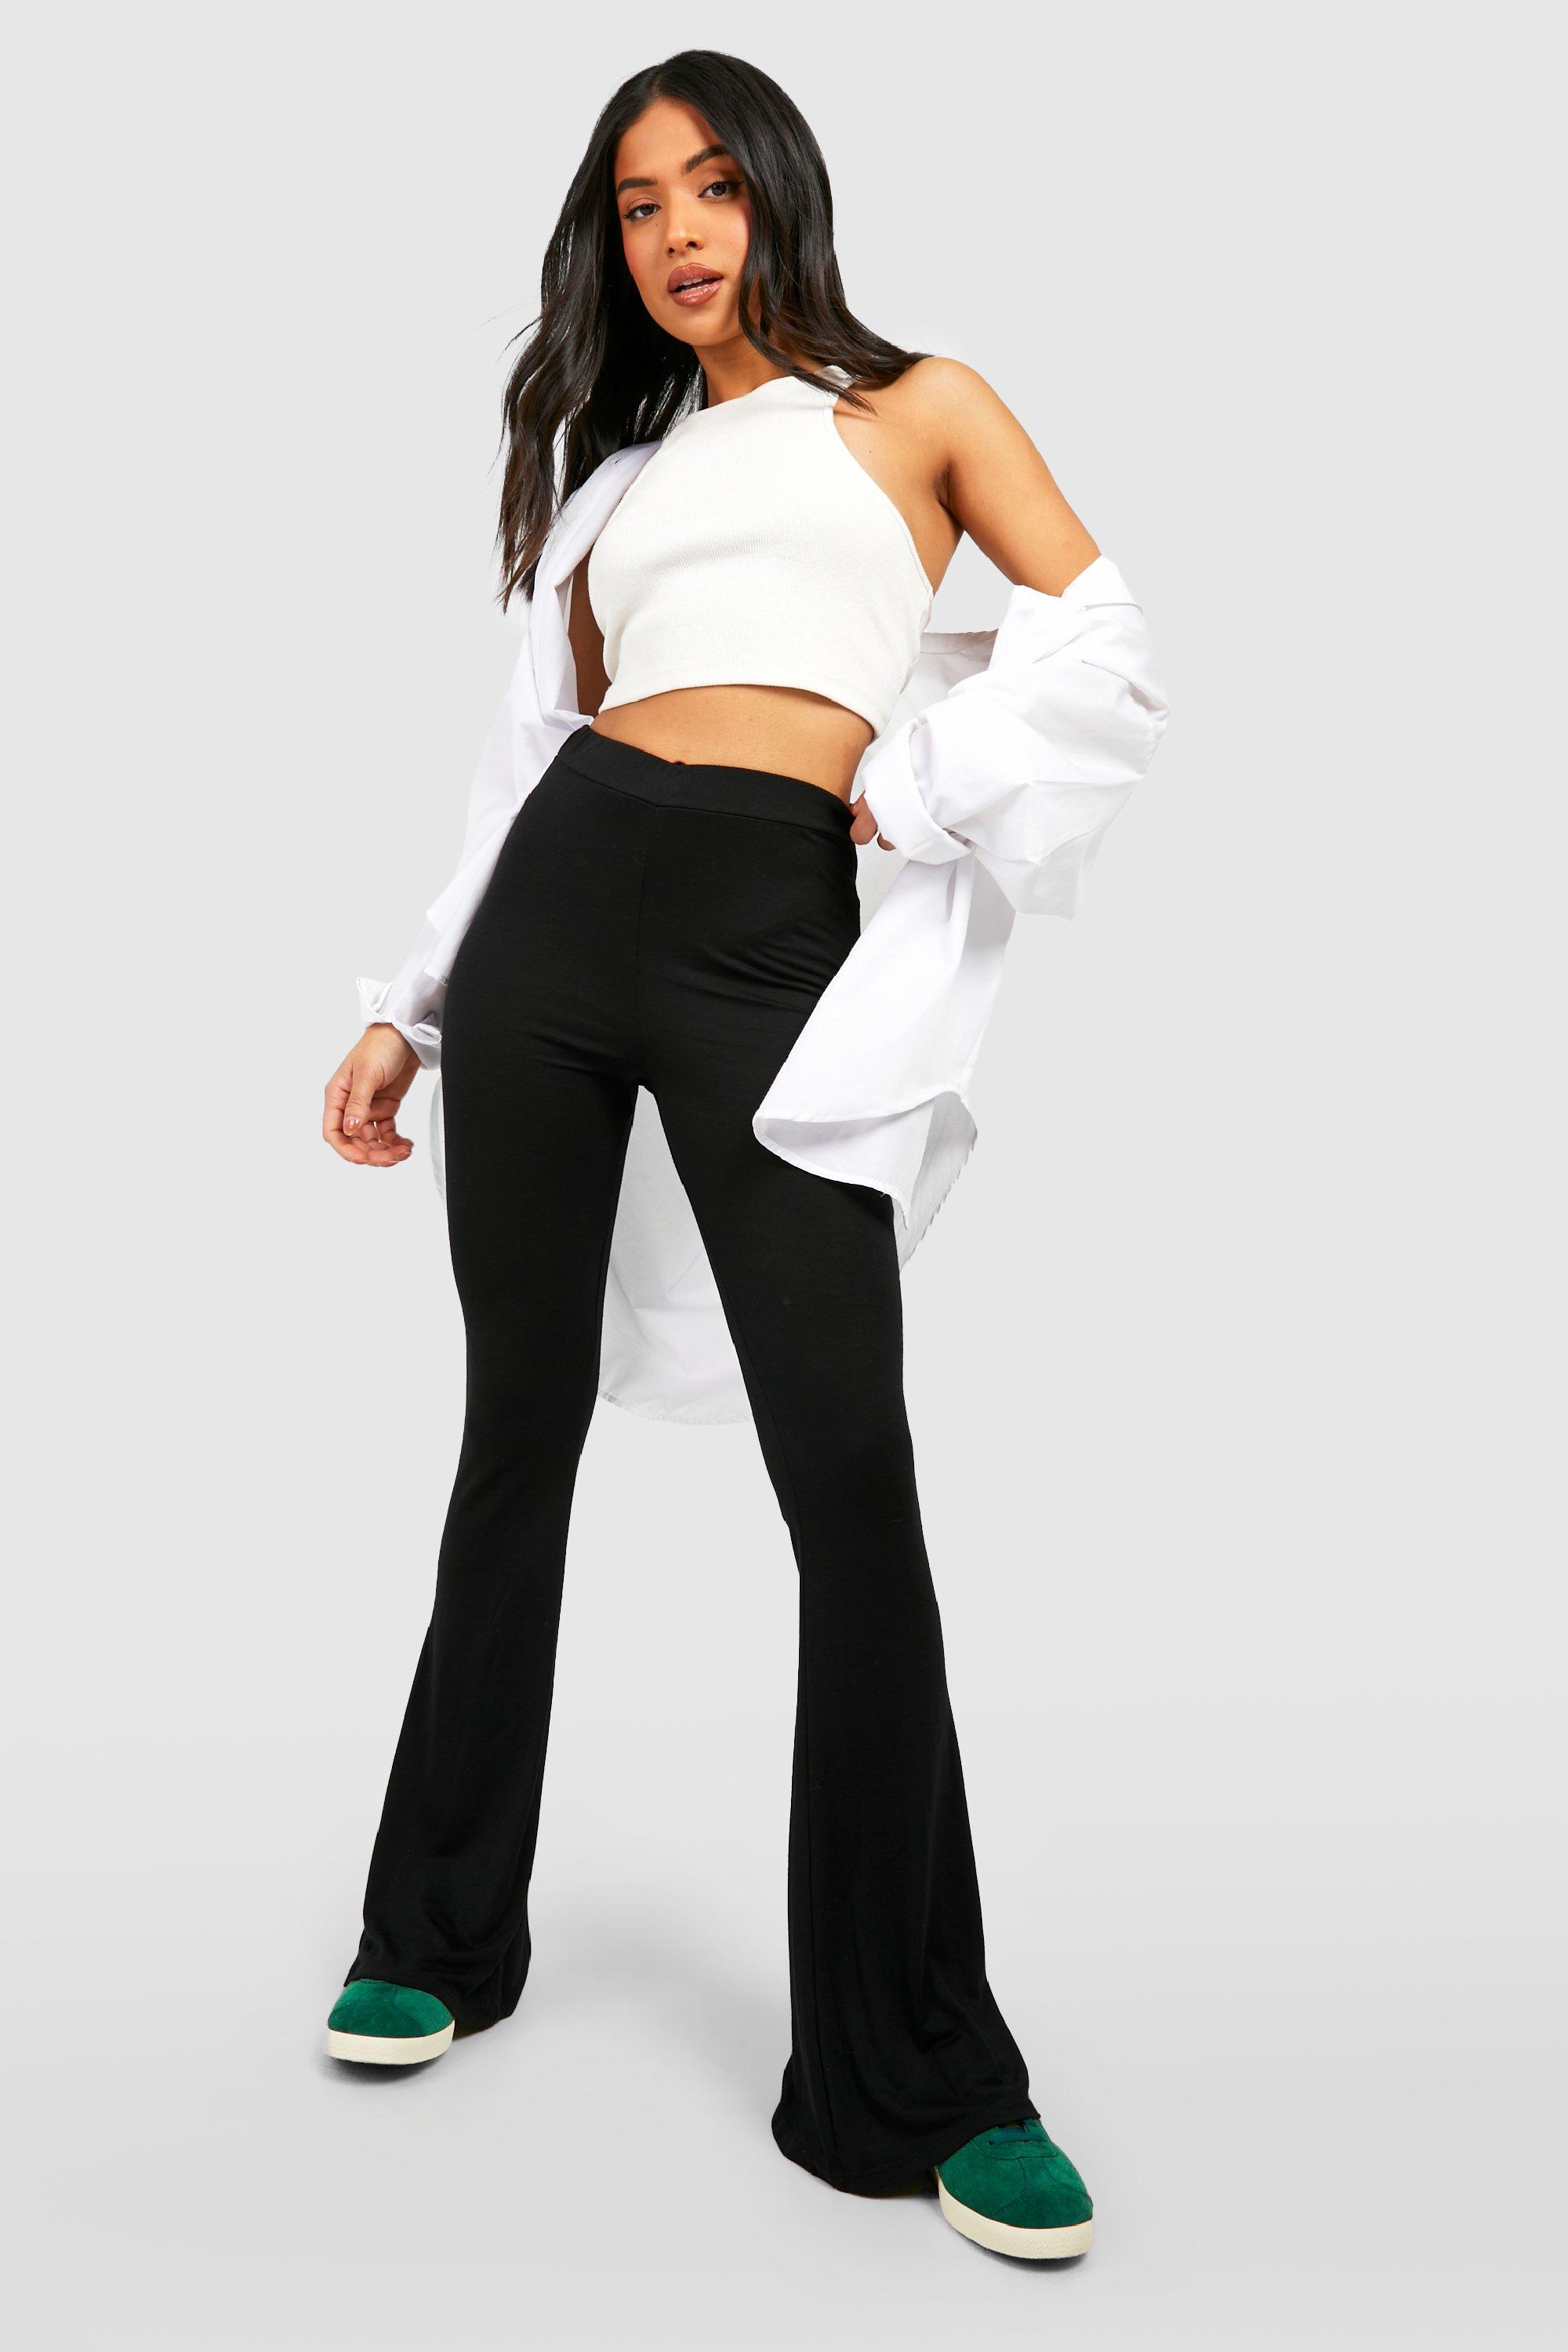 Boohoo Cotton Jersey High Waisted Flared Leggings in Black